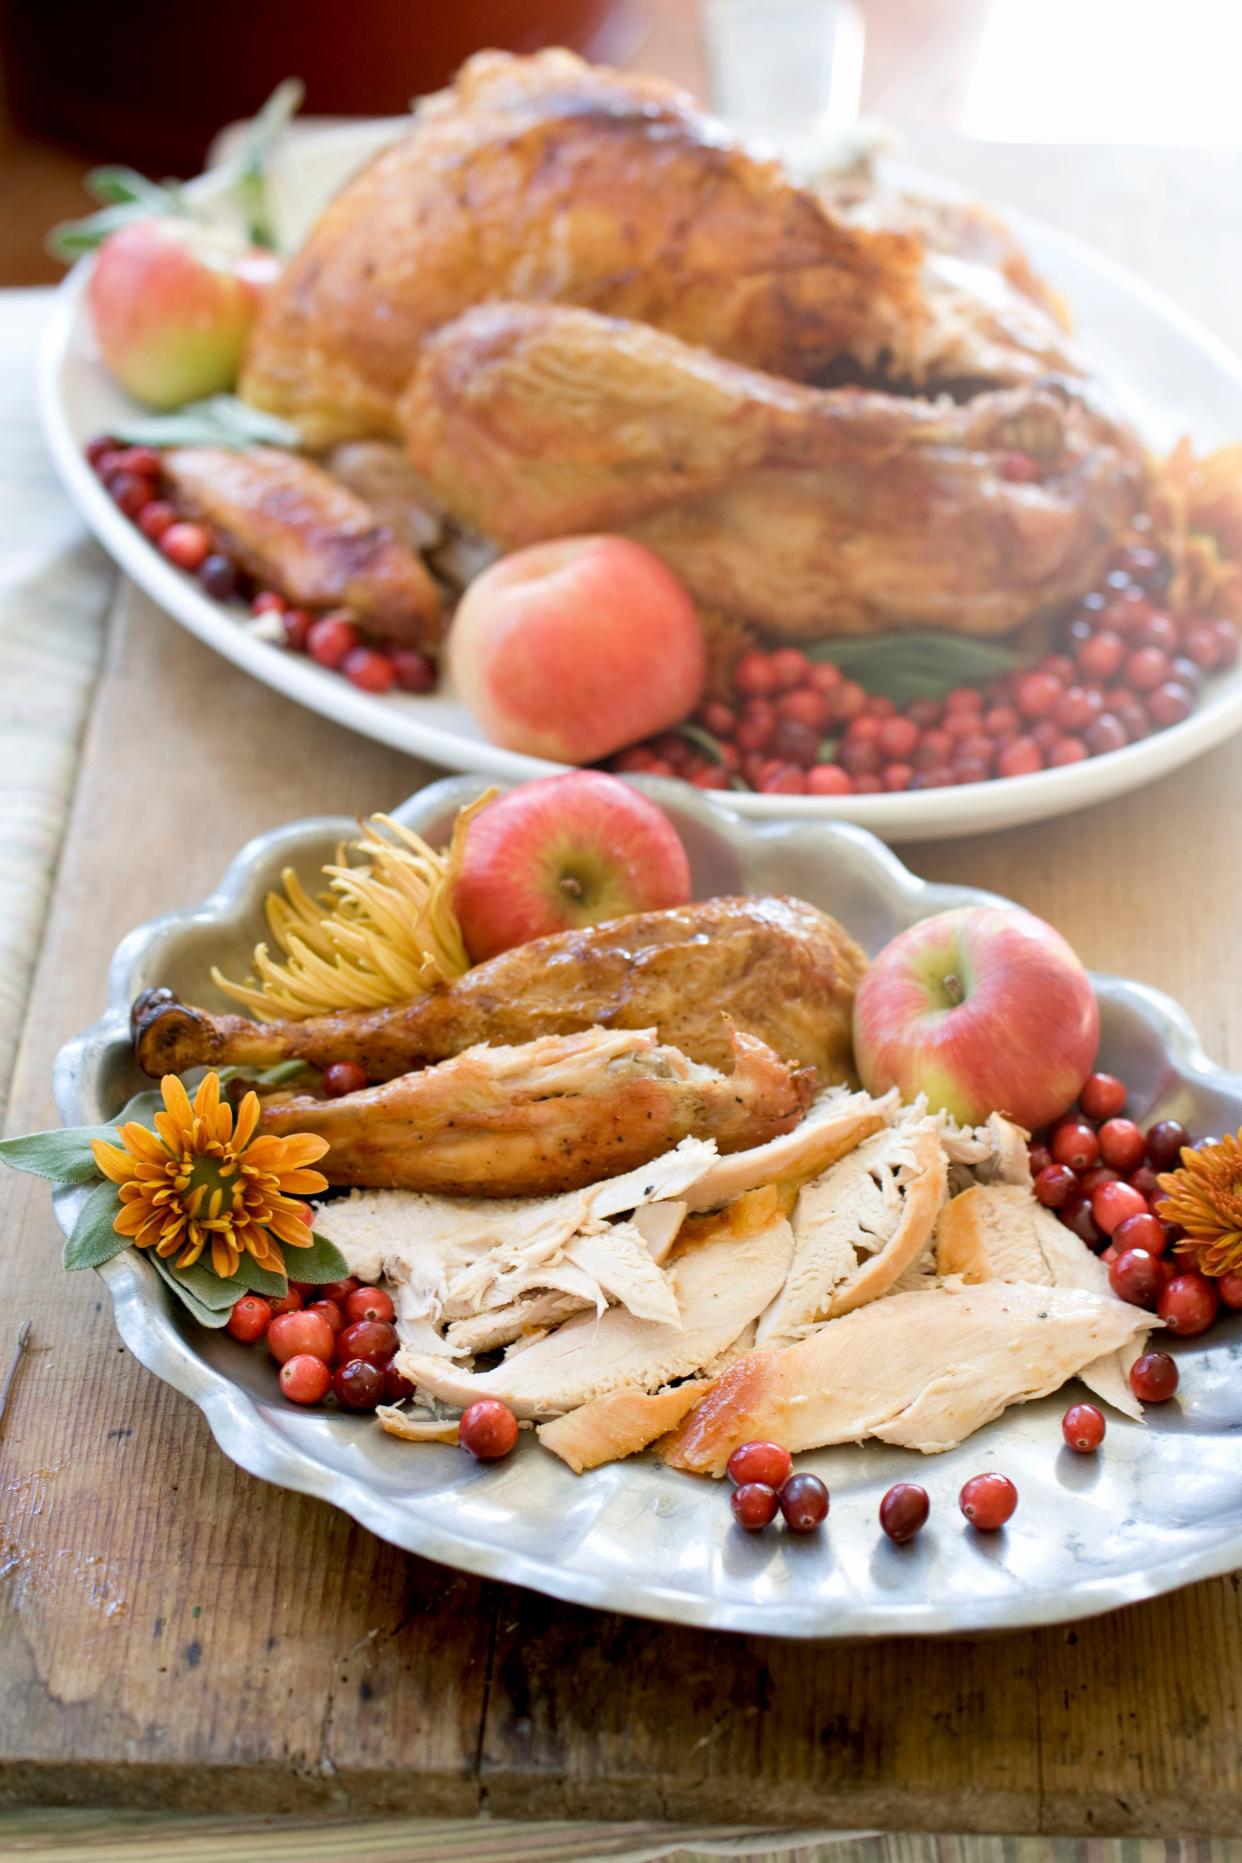 
The safest way to thaw a frozen turkey is in the refrigerator. You'll need about 24 hours per 4 to 5 pounds of turkey.
